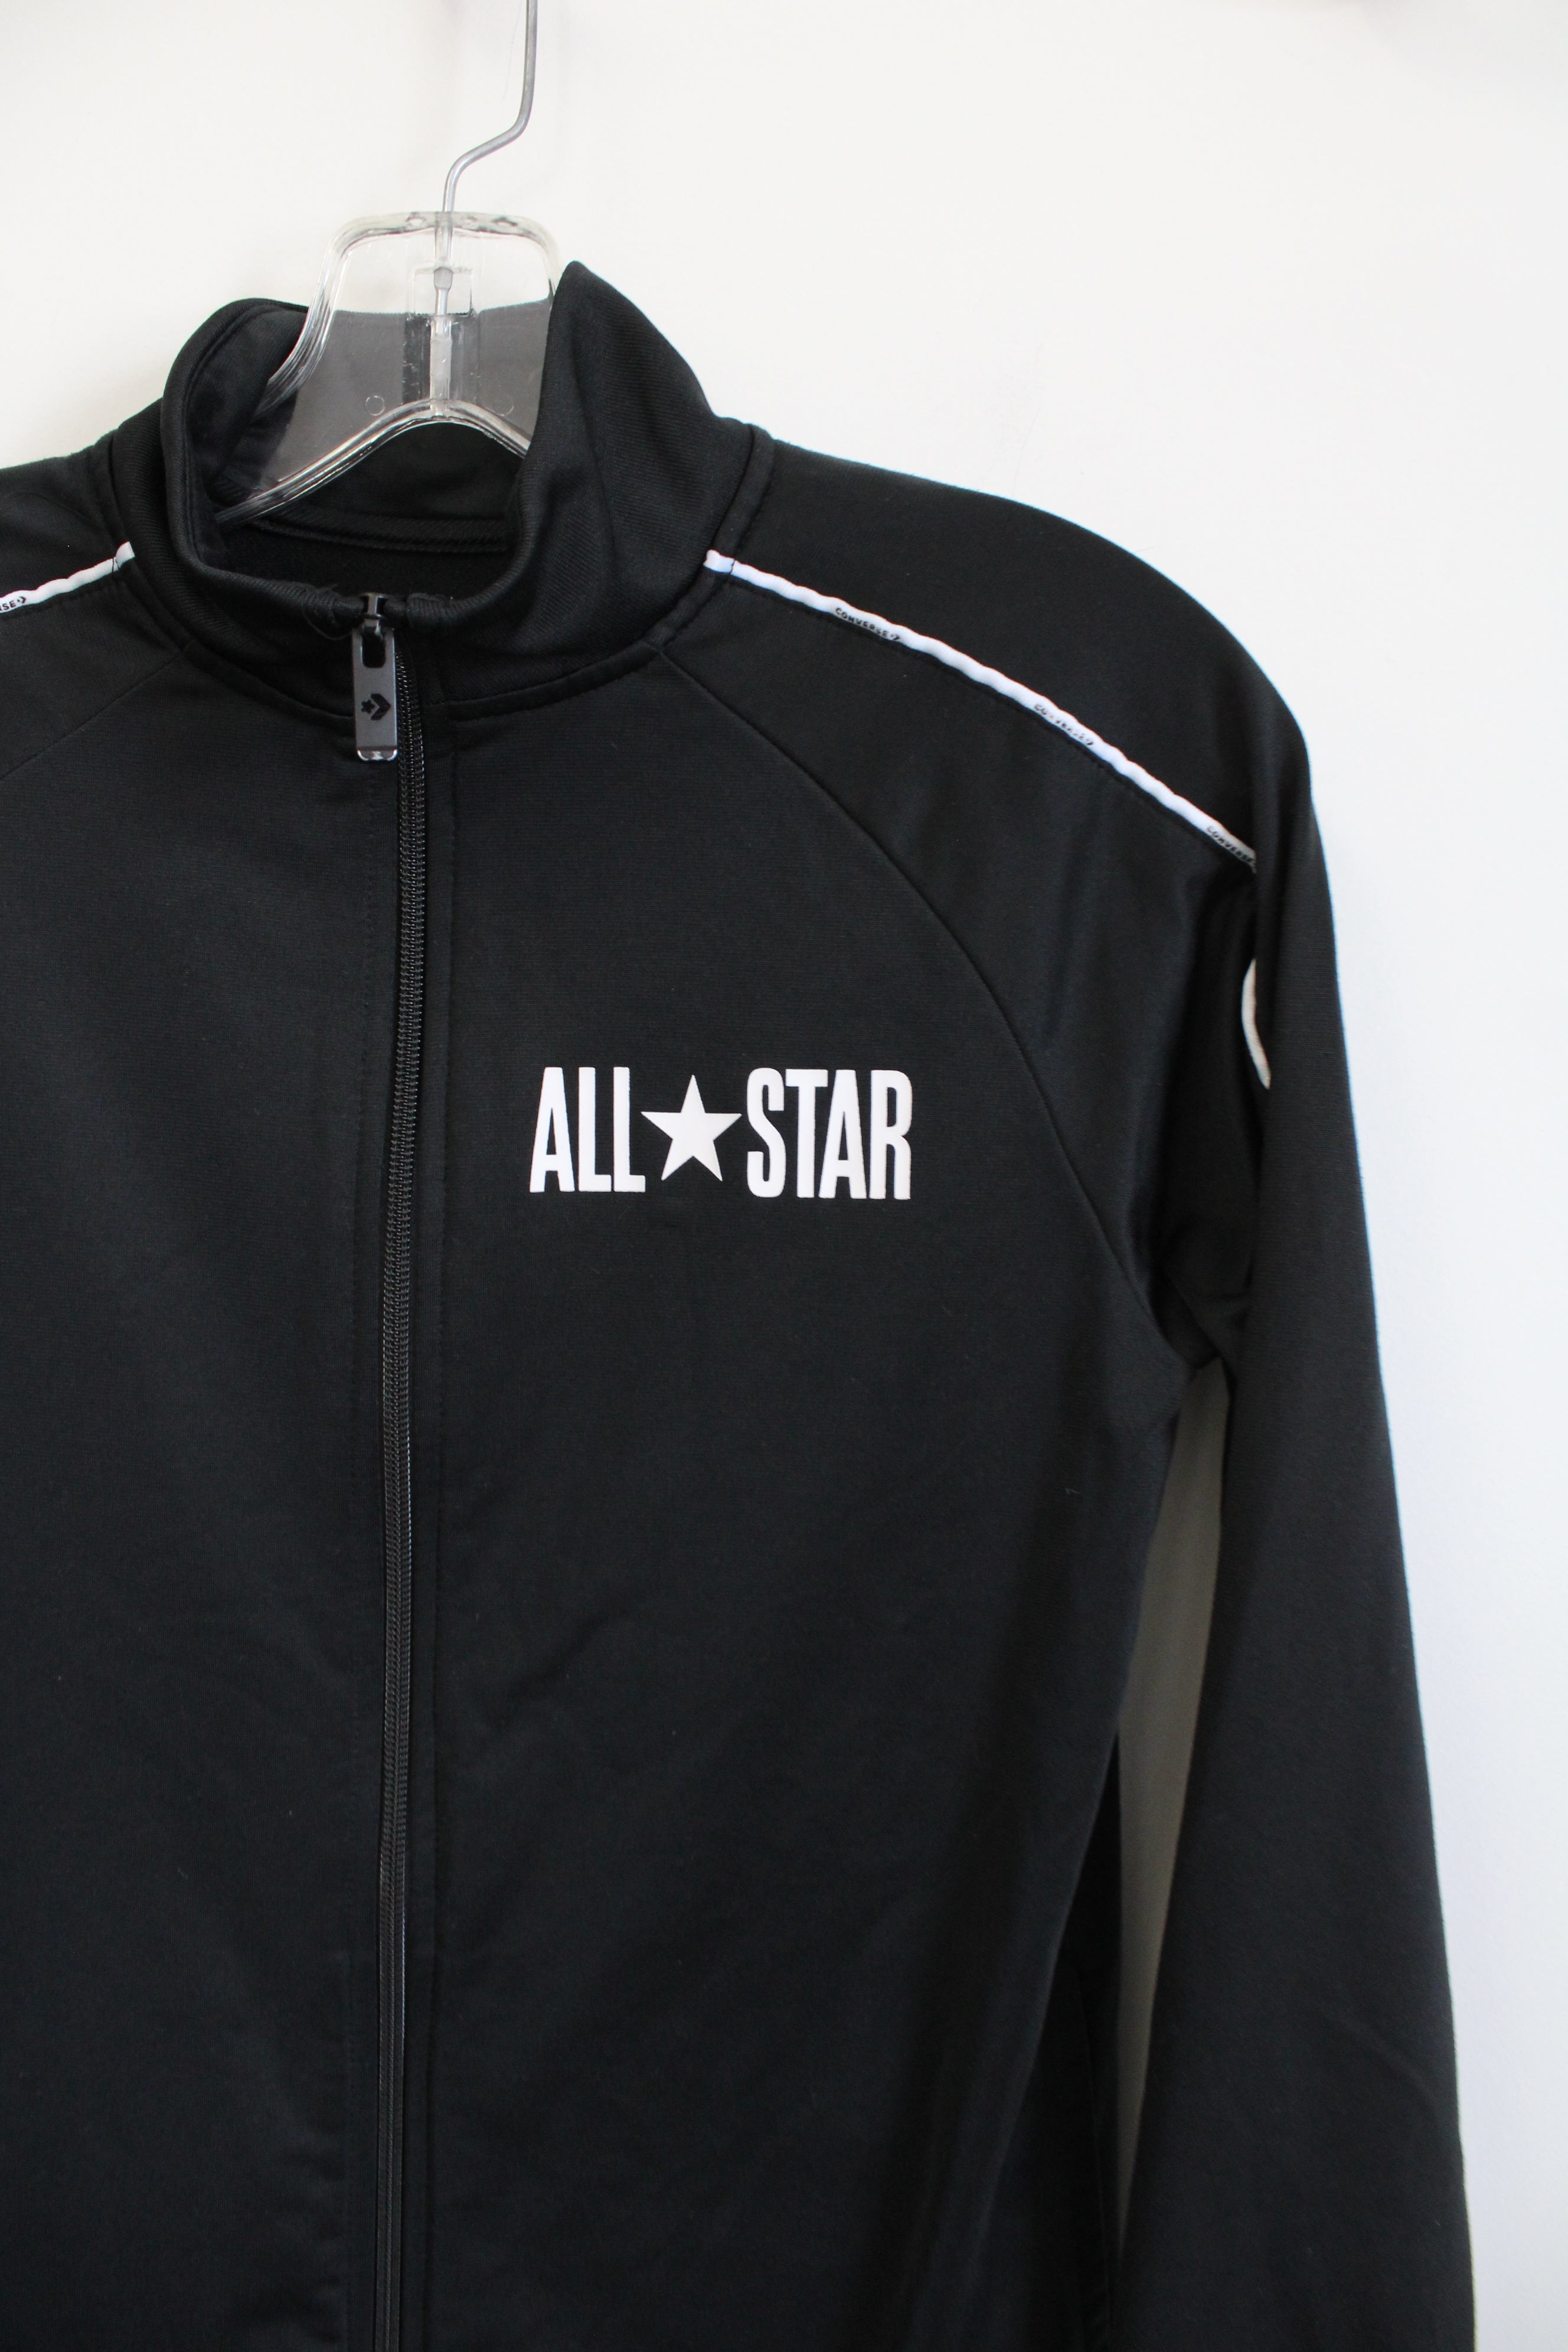 Converse All Star Black Jacket | Youth L (12/13)